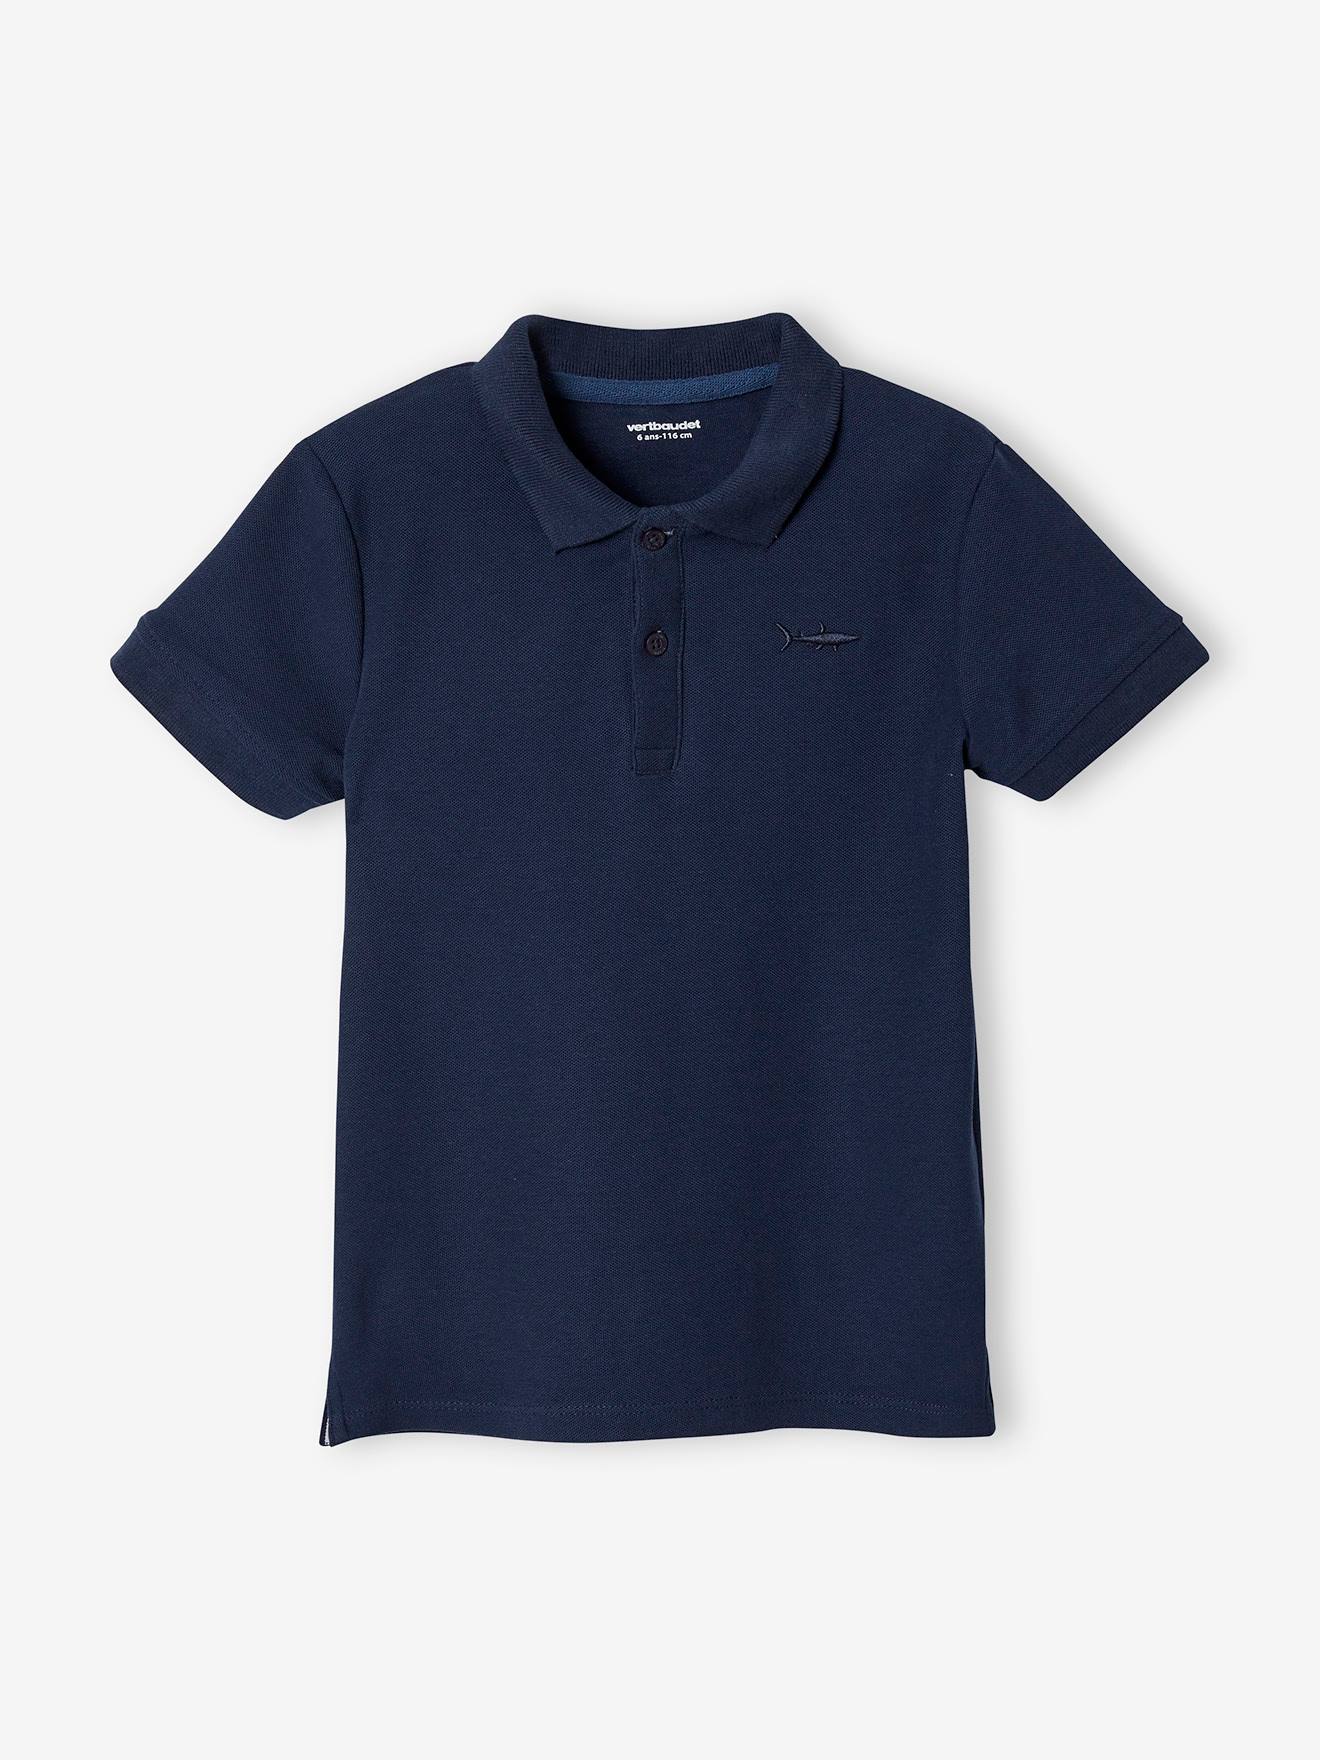 Short Sleeve Polo Shirt, Embroidery on the Chest, for Boys blue medium solid with design